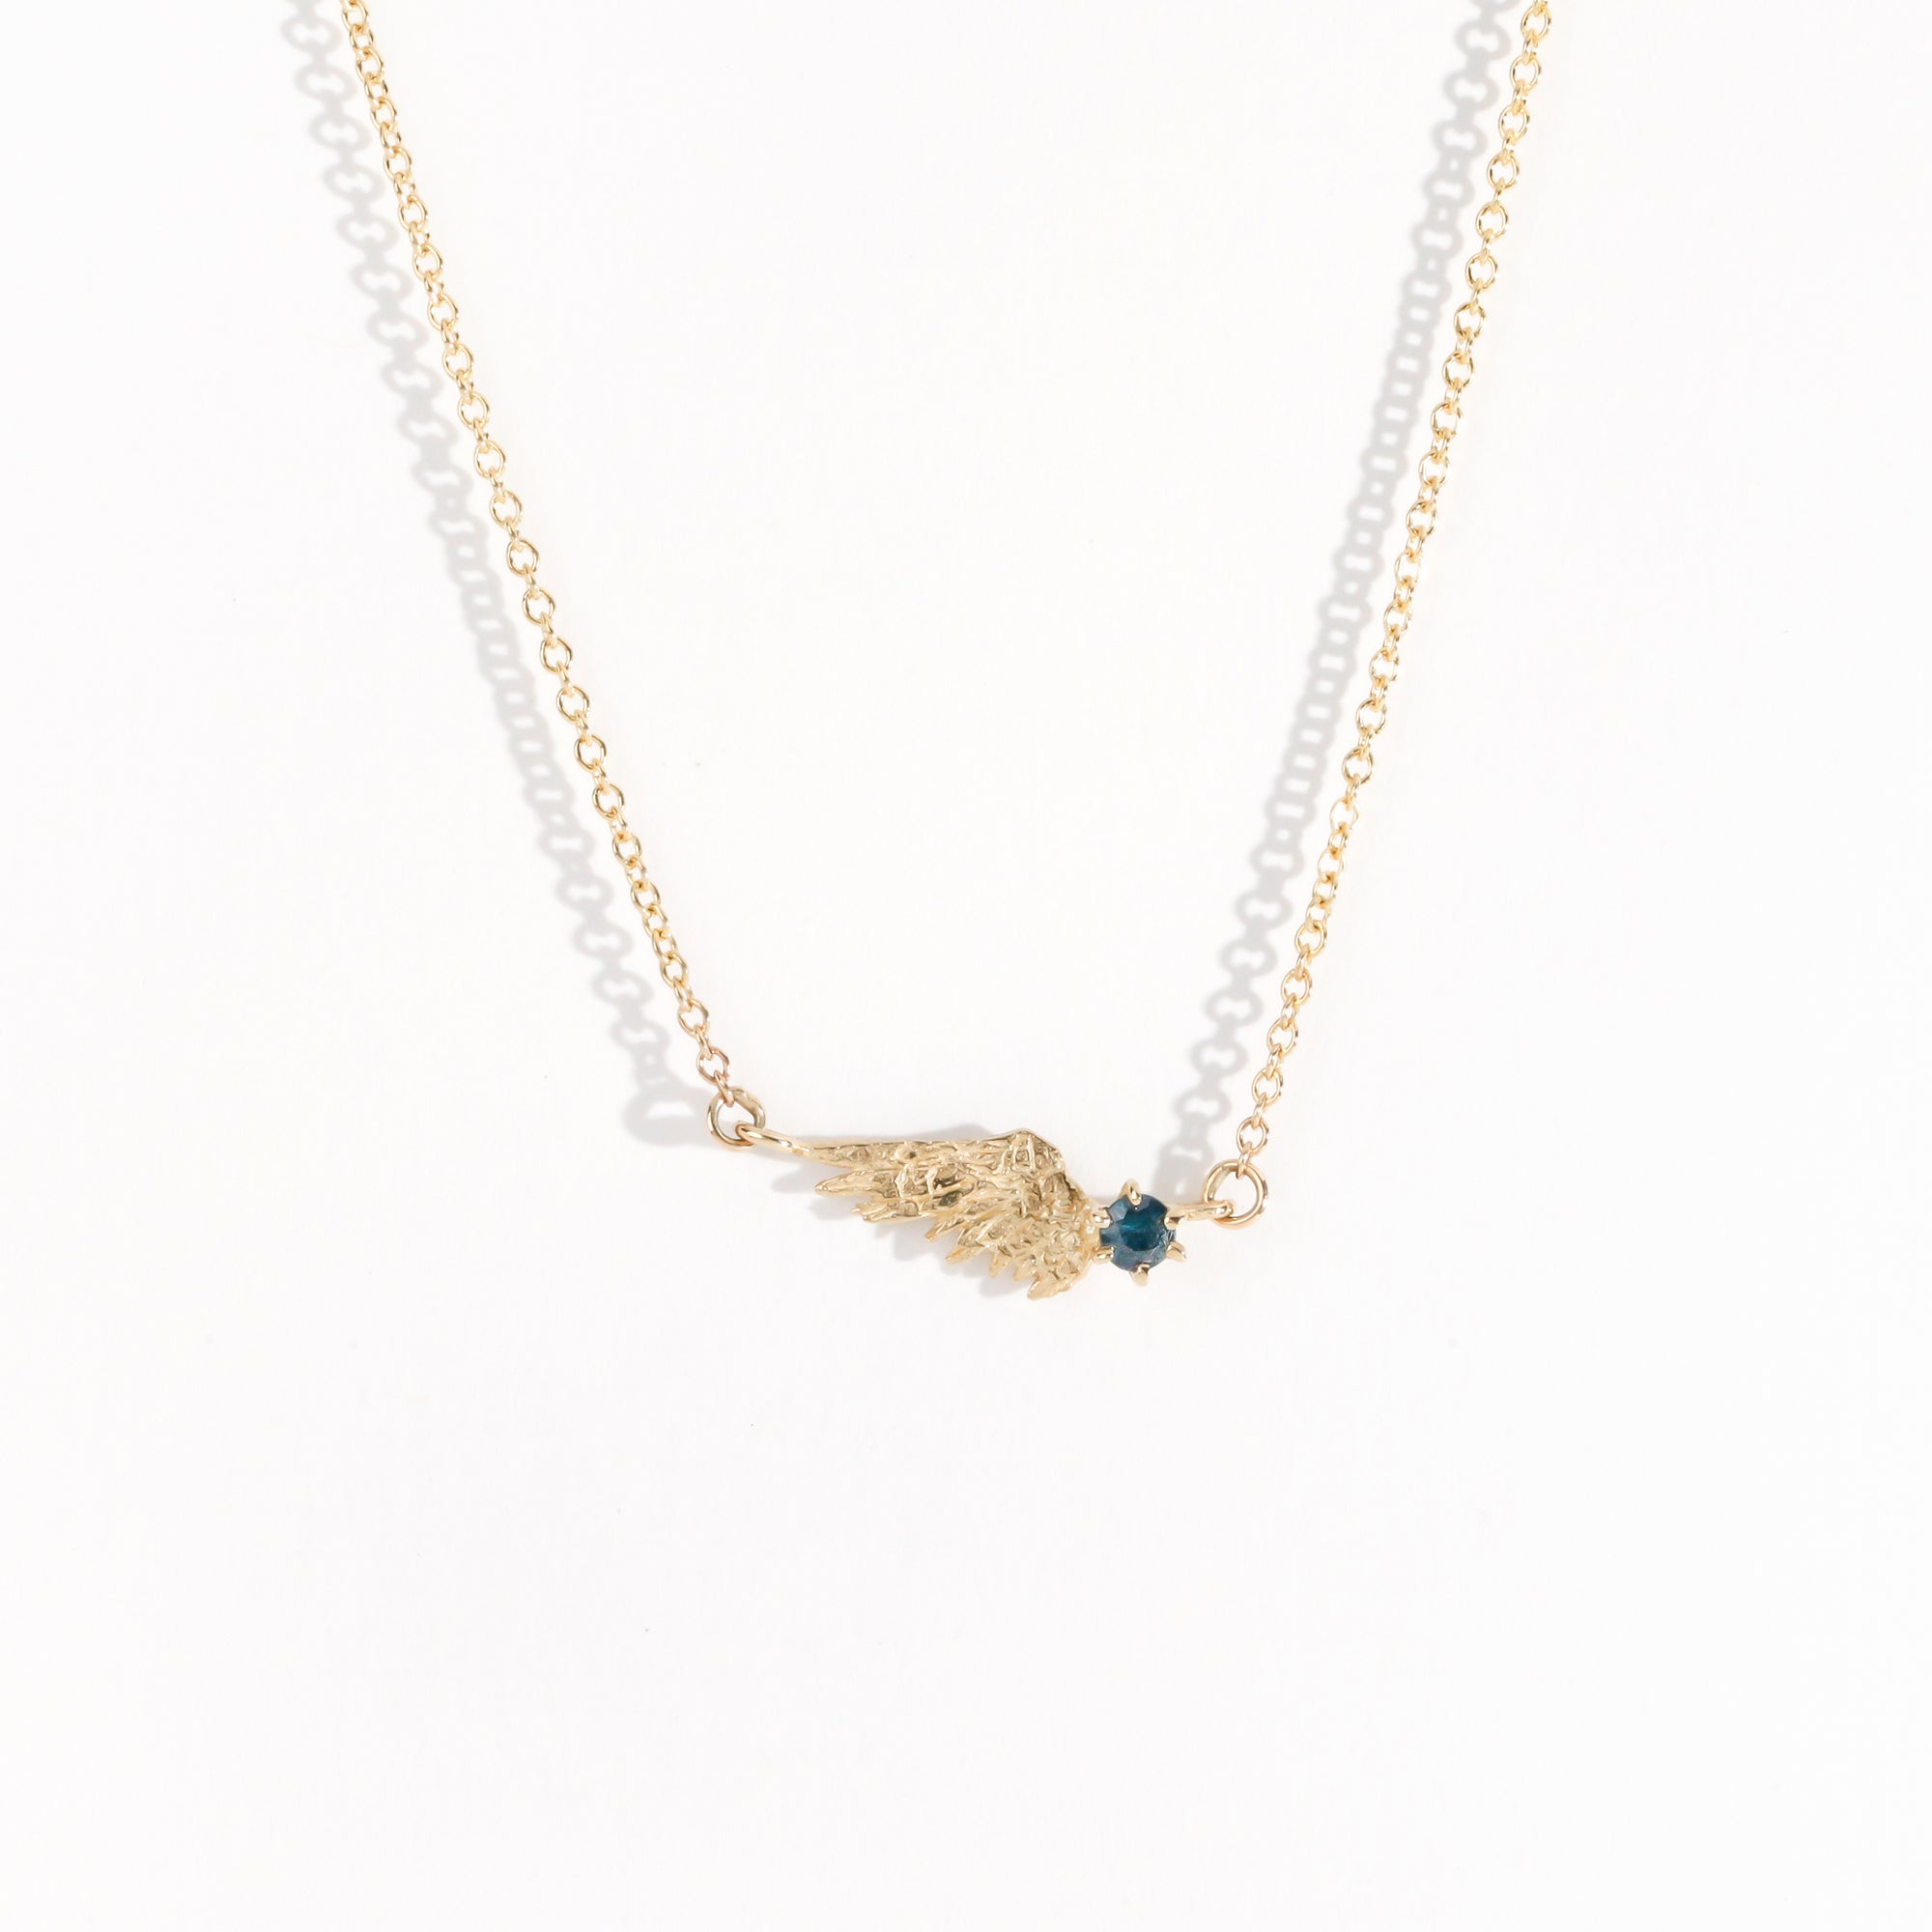 Handmade in Melbourne 9ct Yellow Gold Wing Necklace with an Ethically Sourced Australian Blue Sapphire and a 9ct Yellow Gold Chain.